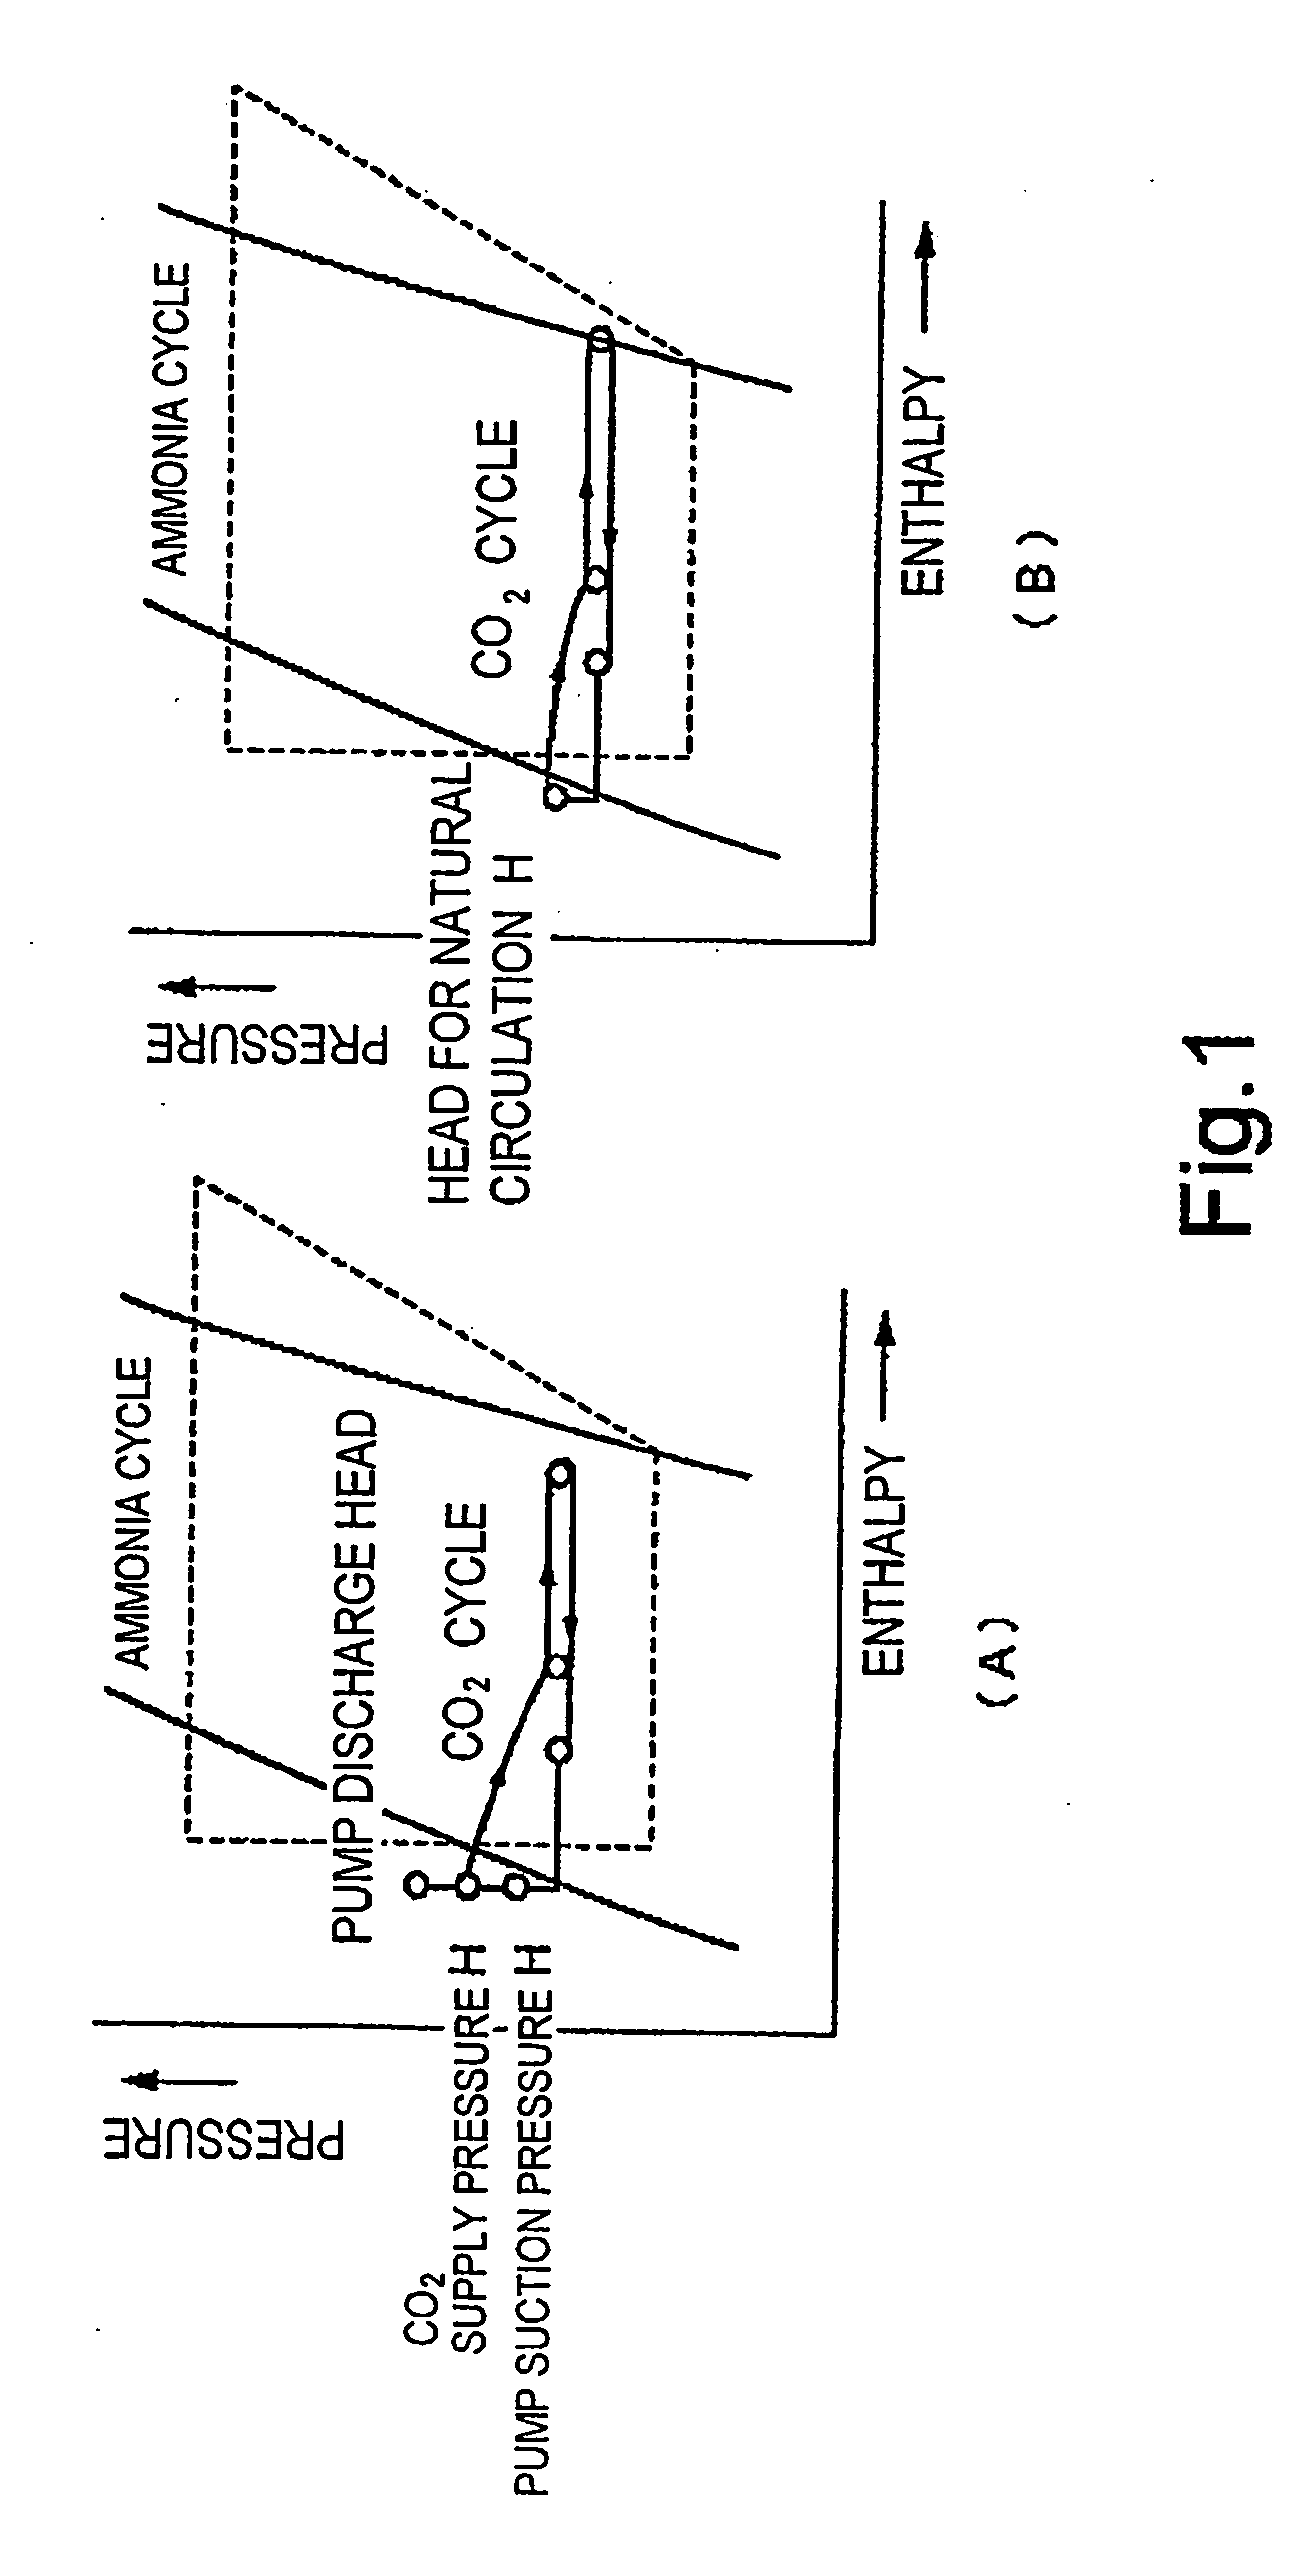 Ammonia/CO2 refrigeration system, CO2 brine production system for use therein, and ammonia cooling unit incorporating that production system